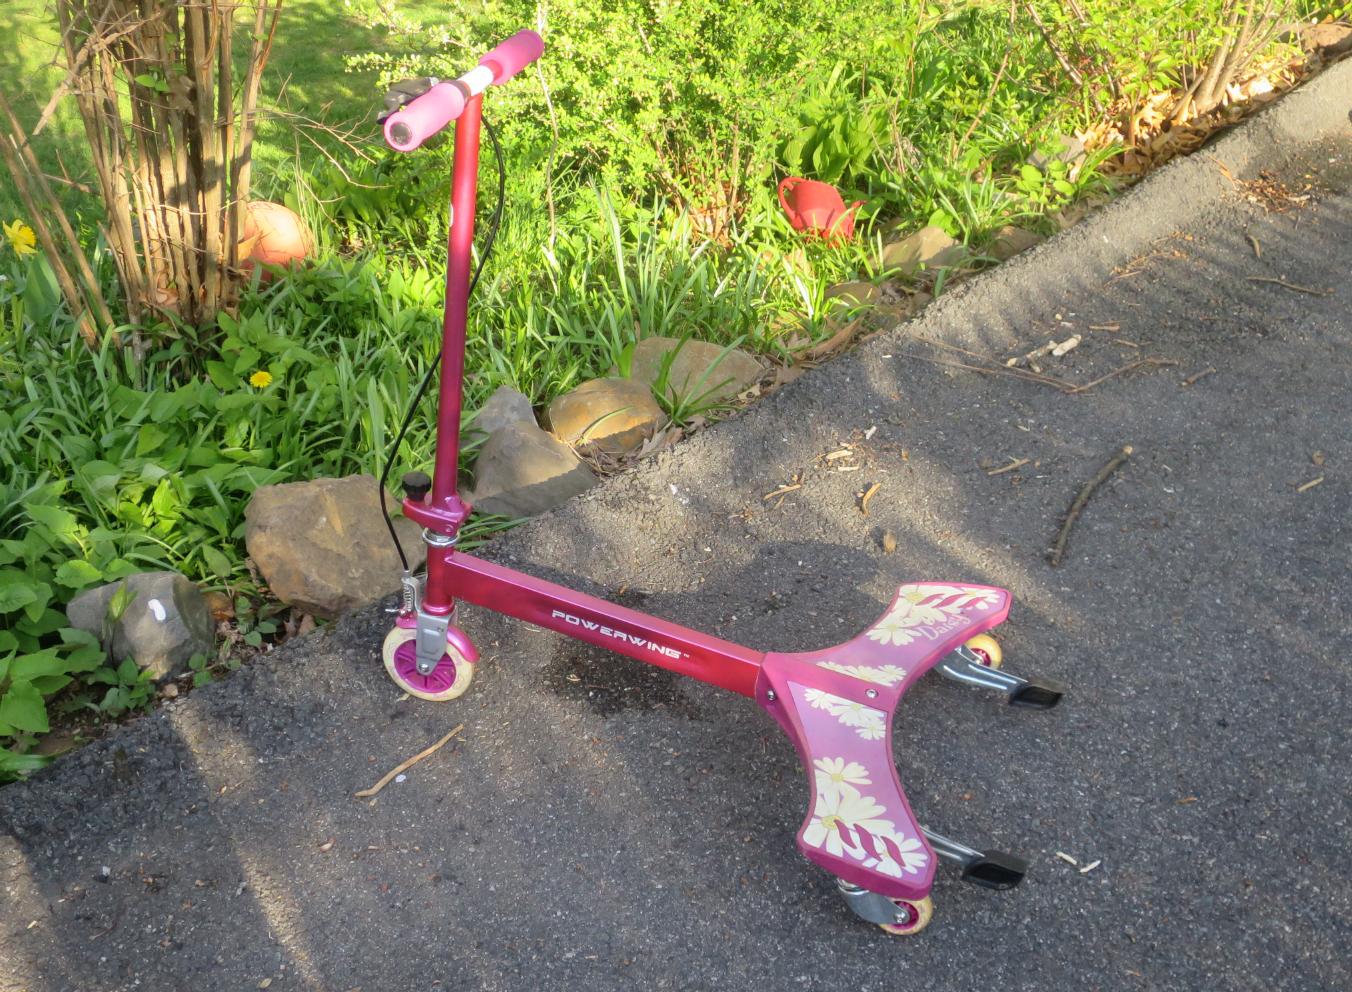 Scooter Device